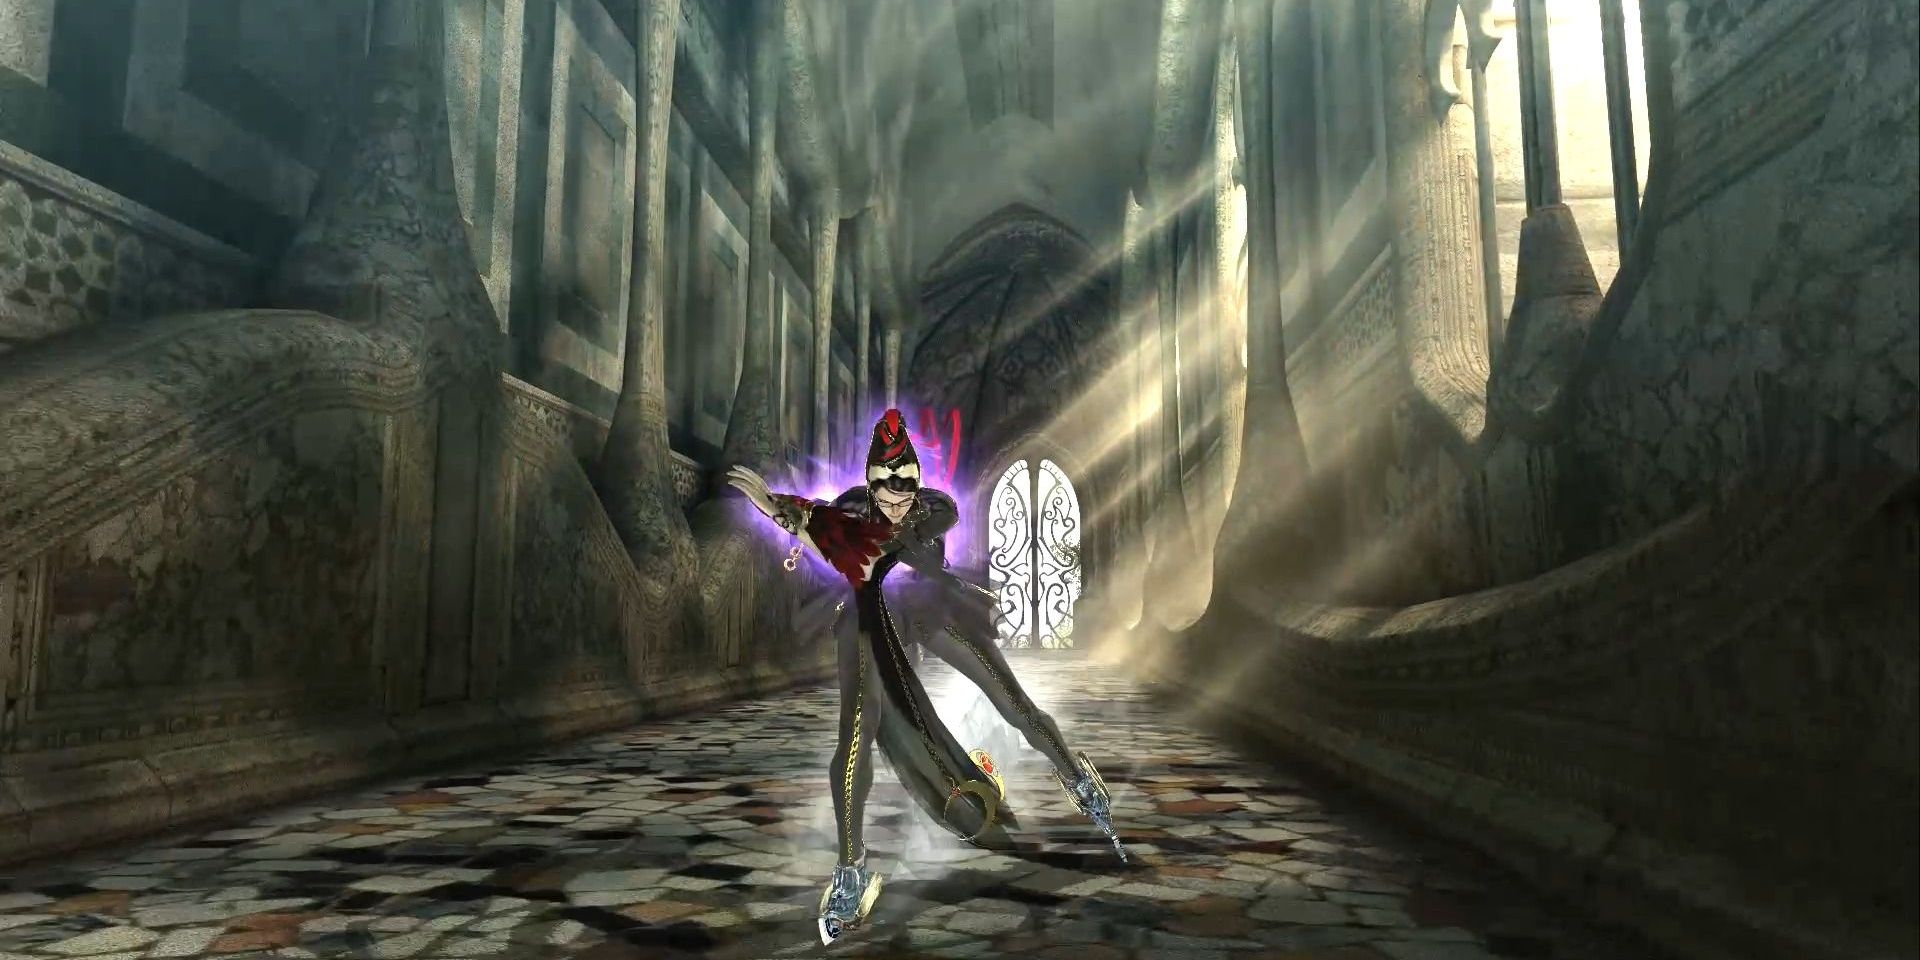 Bayonetta skating along with the Odette ice skates